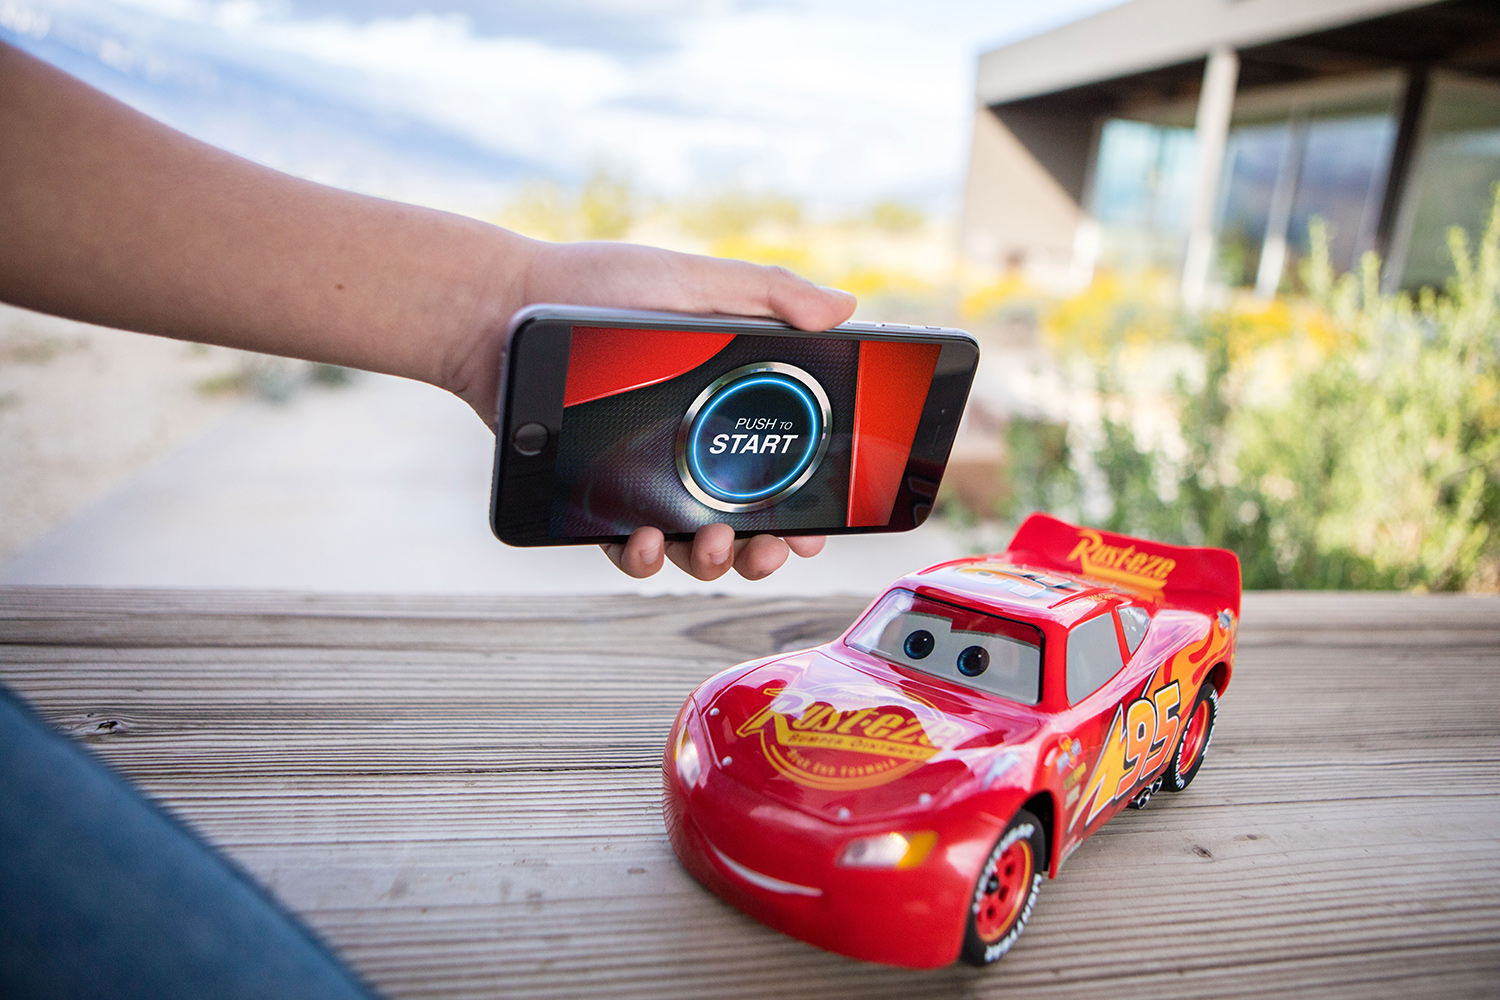 Sphero's Ultimate Lightning McQueen is a Toy Racing Car for the Ages |  Digital Trends